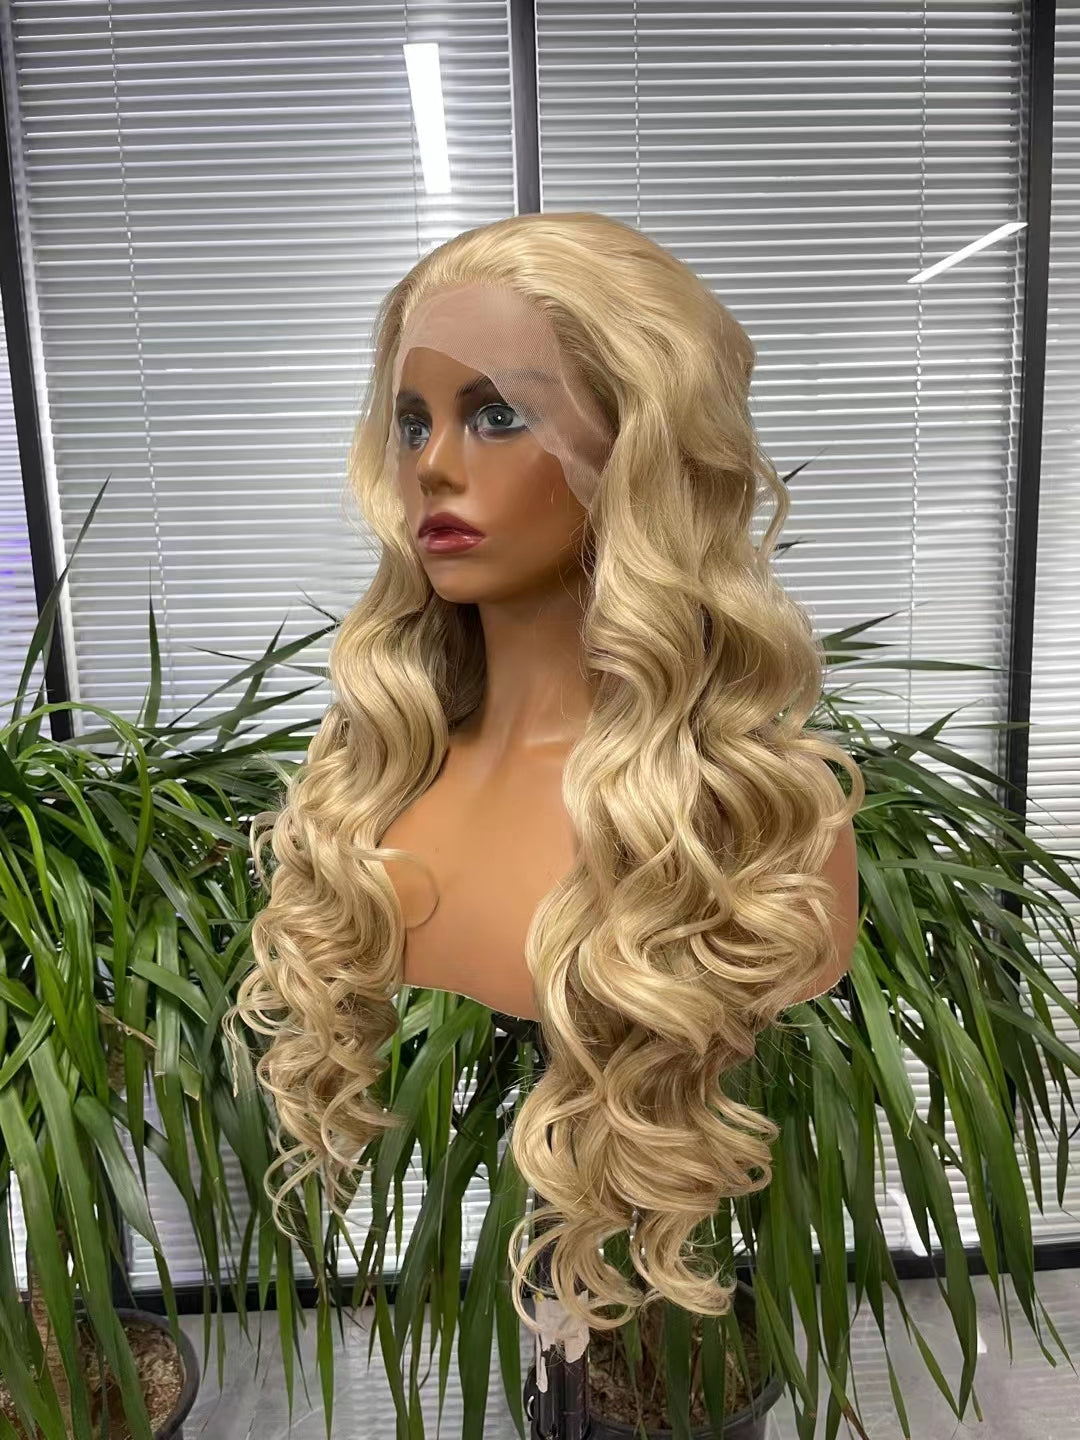 Long Wave BLONDE #613 FRONTAL LACE WIG